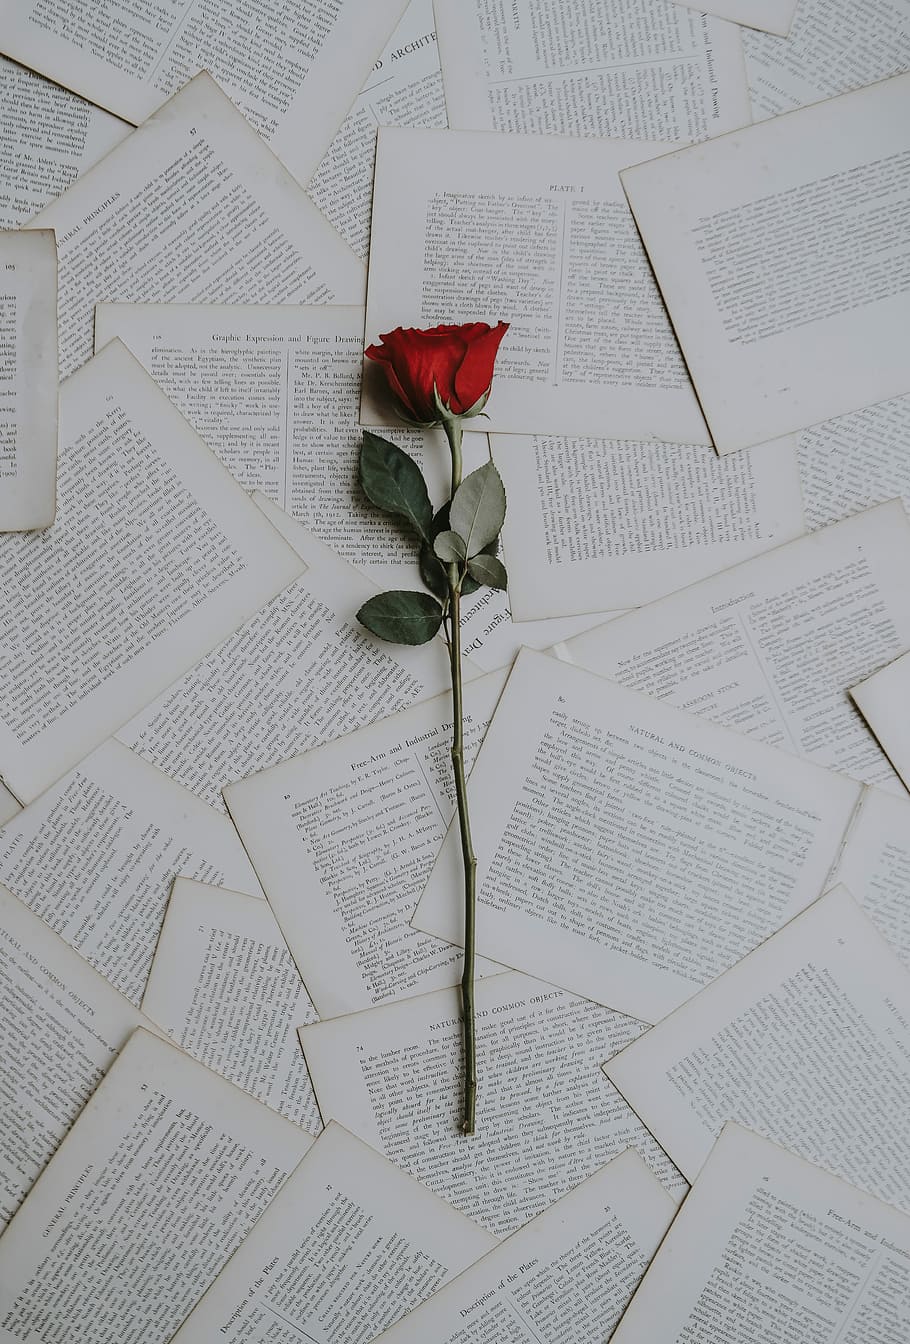 red rose on book sheets, red rose flower on white book pages